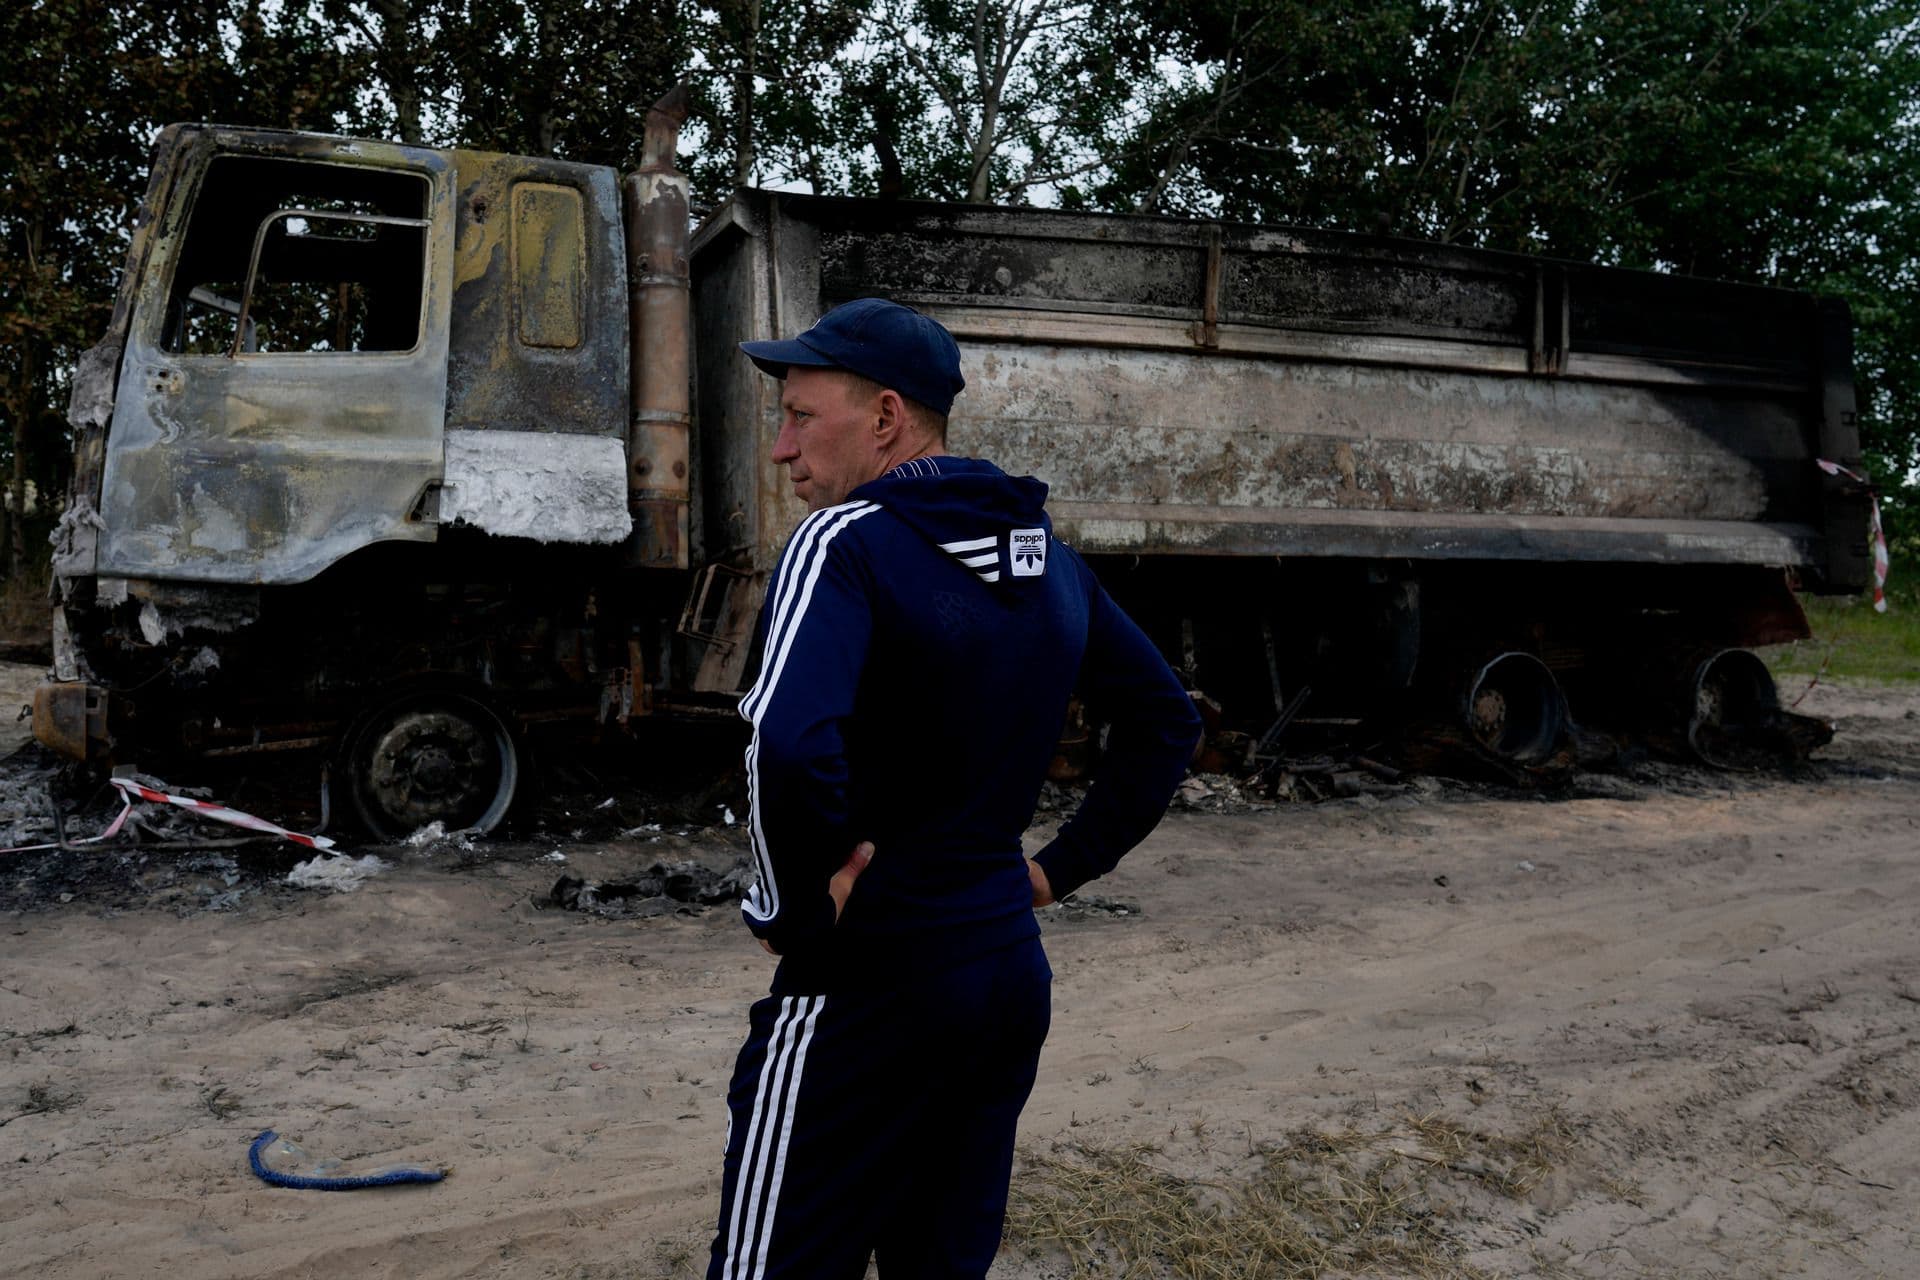 Vadym Schvydchenko stands next to his truck recentely damaged by a mine on a dirt track near Makariv, on the outskirts of Kyiv